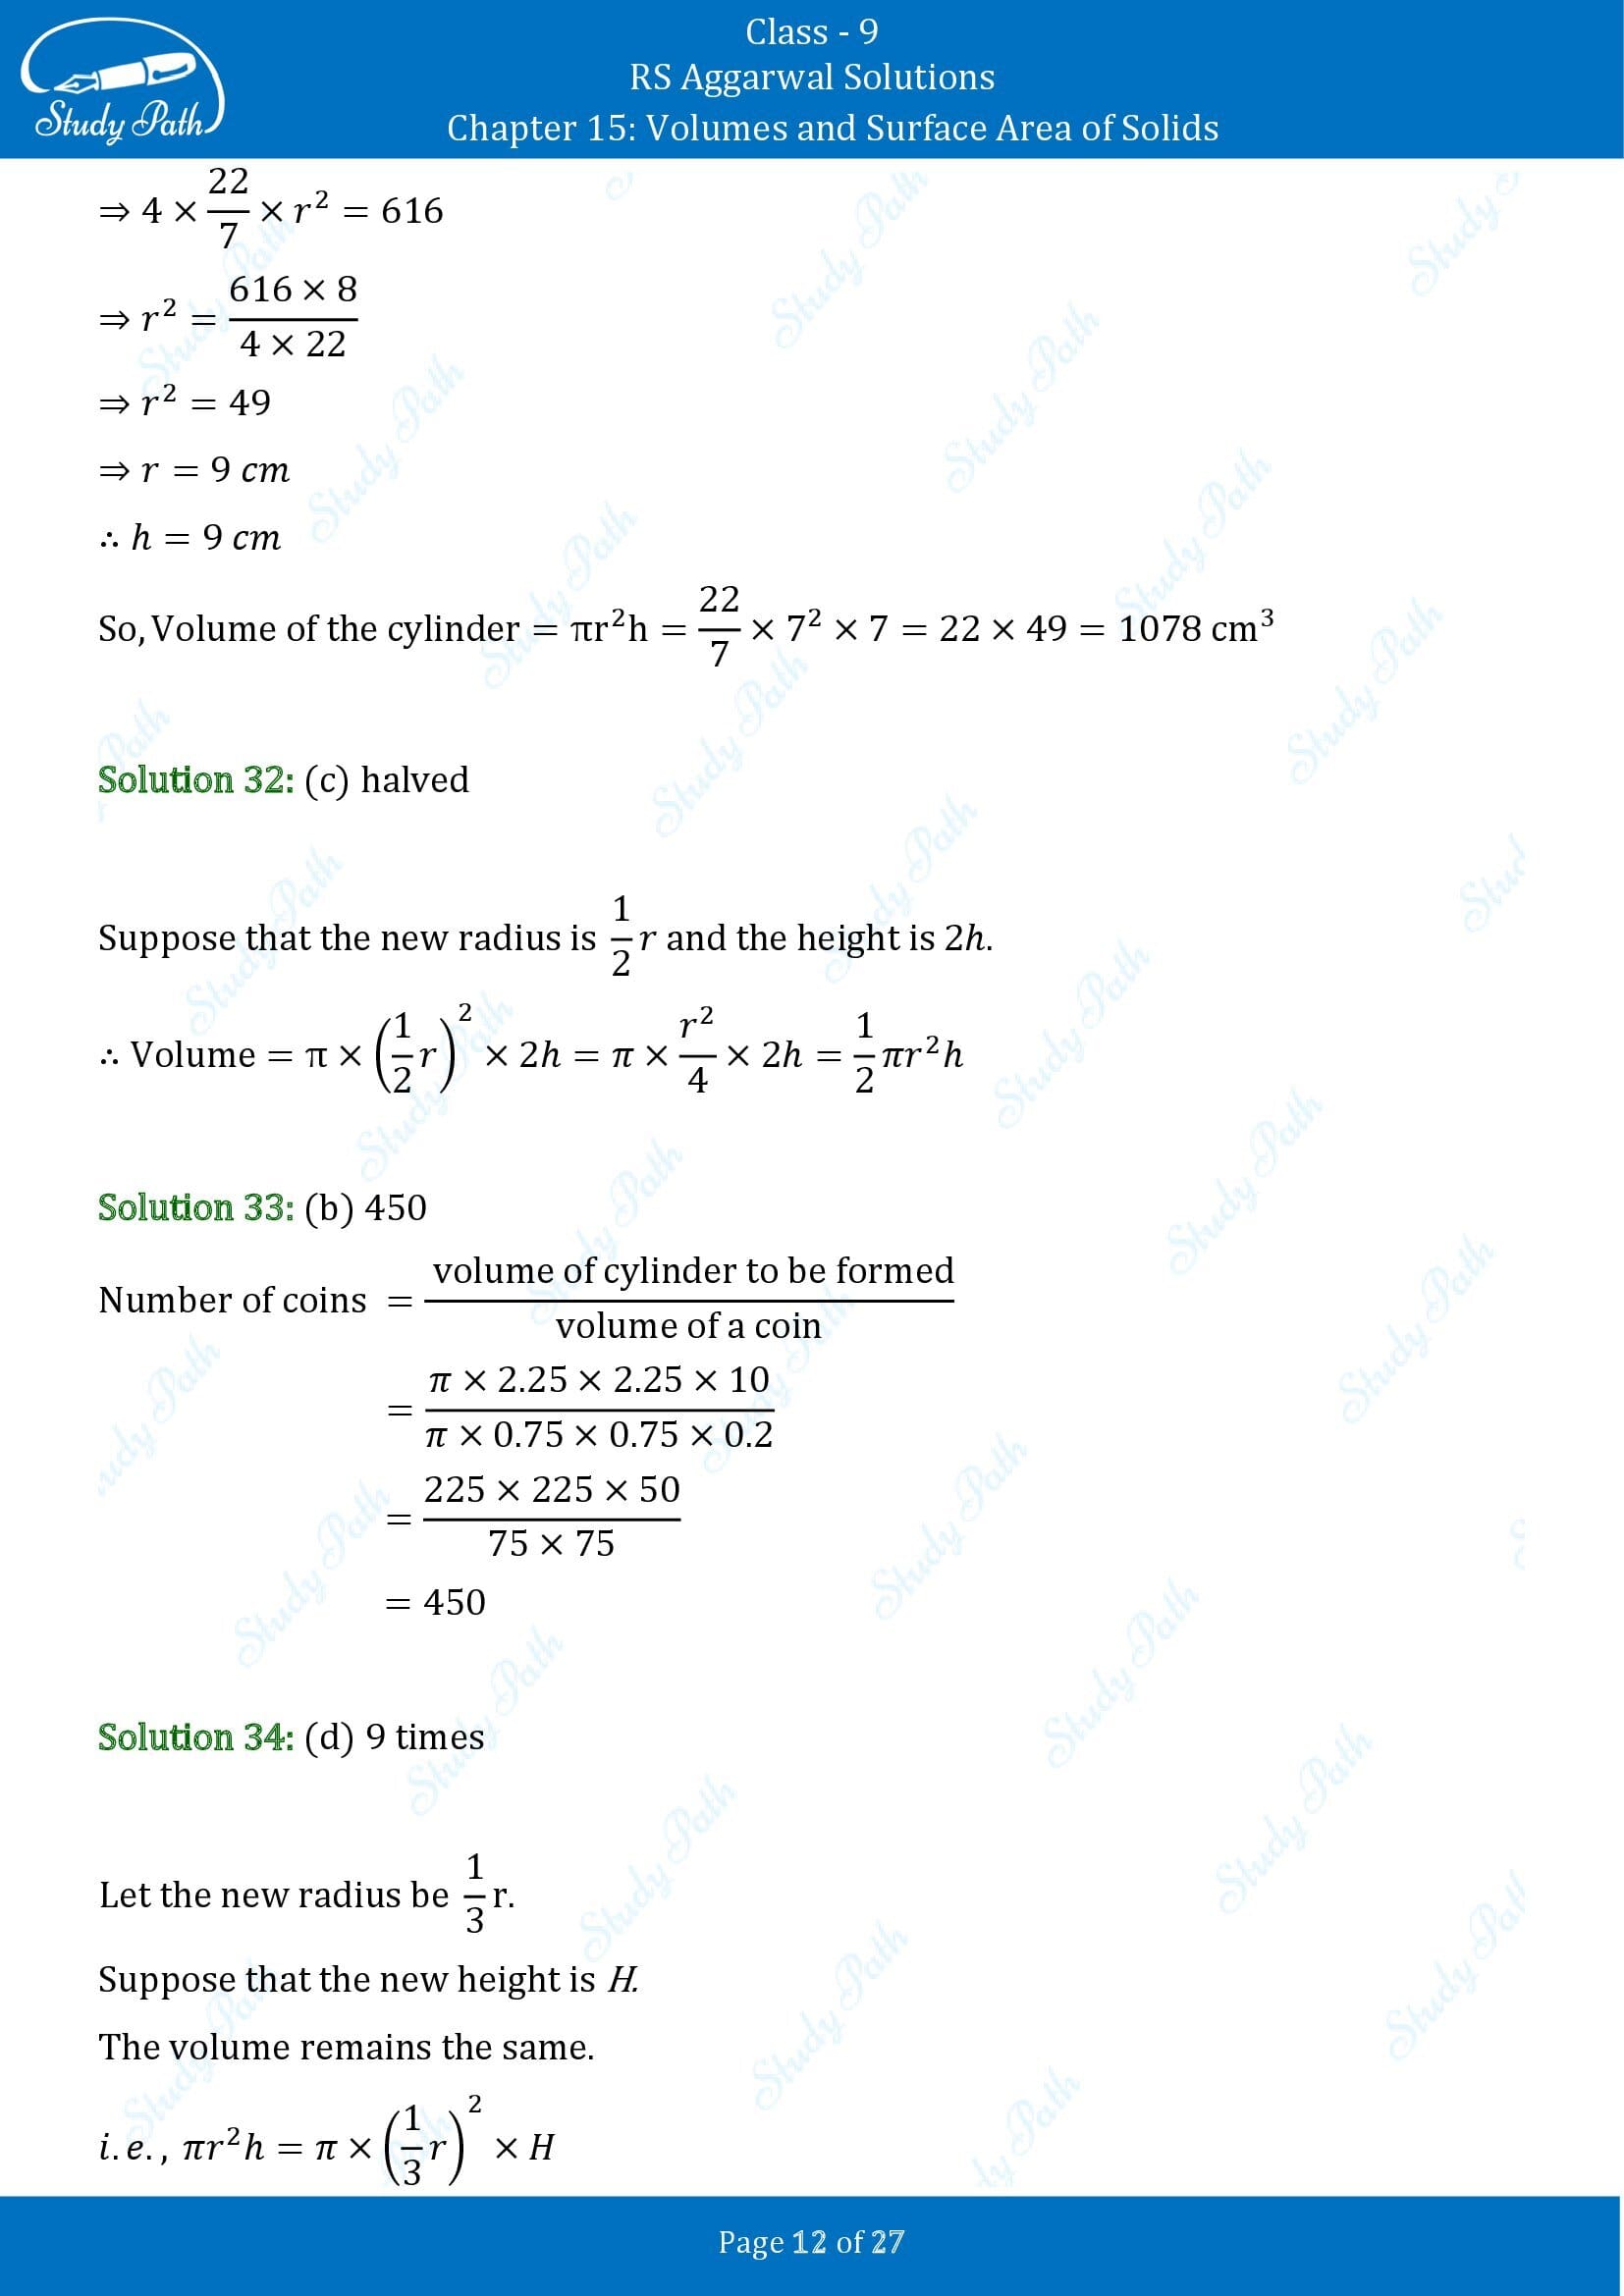 RS Aggarwal Solutions Class 9 Chapter 15 Volumes and Surface Area of Solids Multiple Choice Questions MCQs 00012